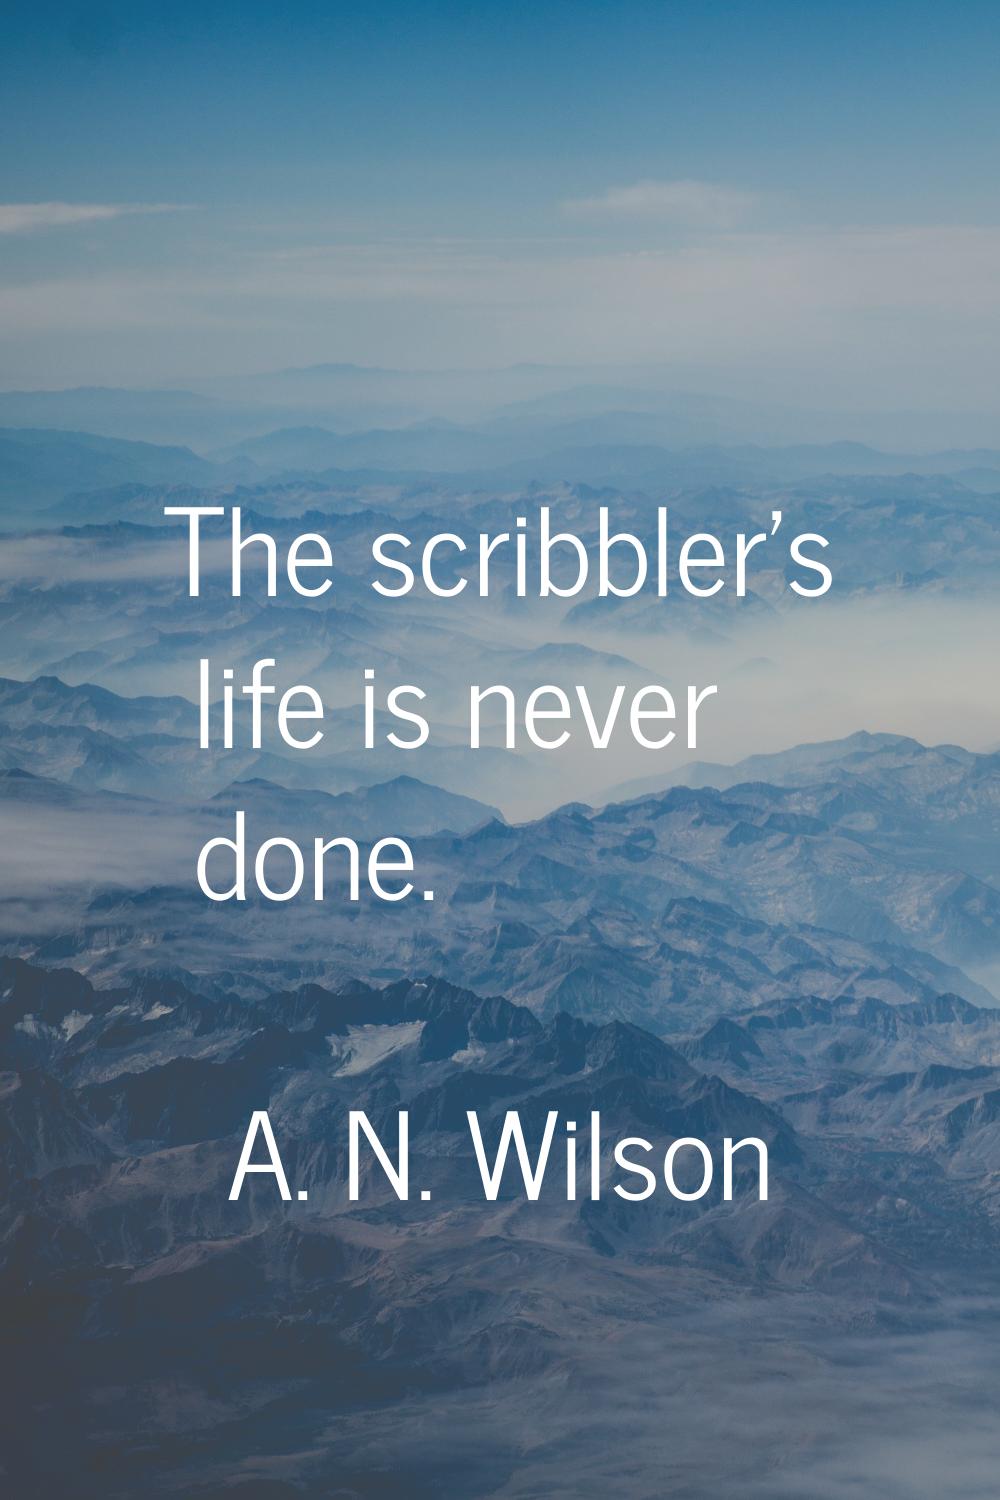 The scribbler's life is never done.